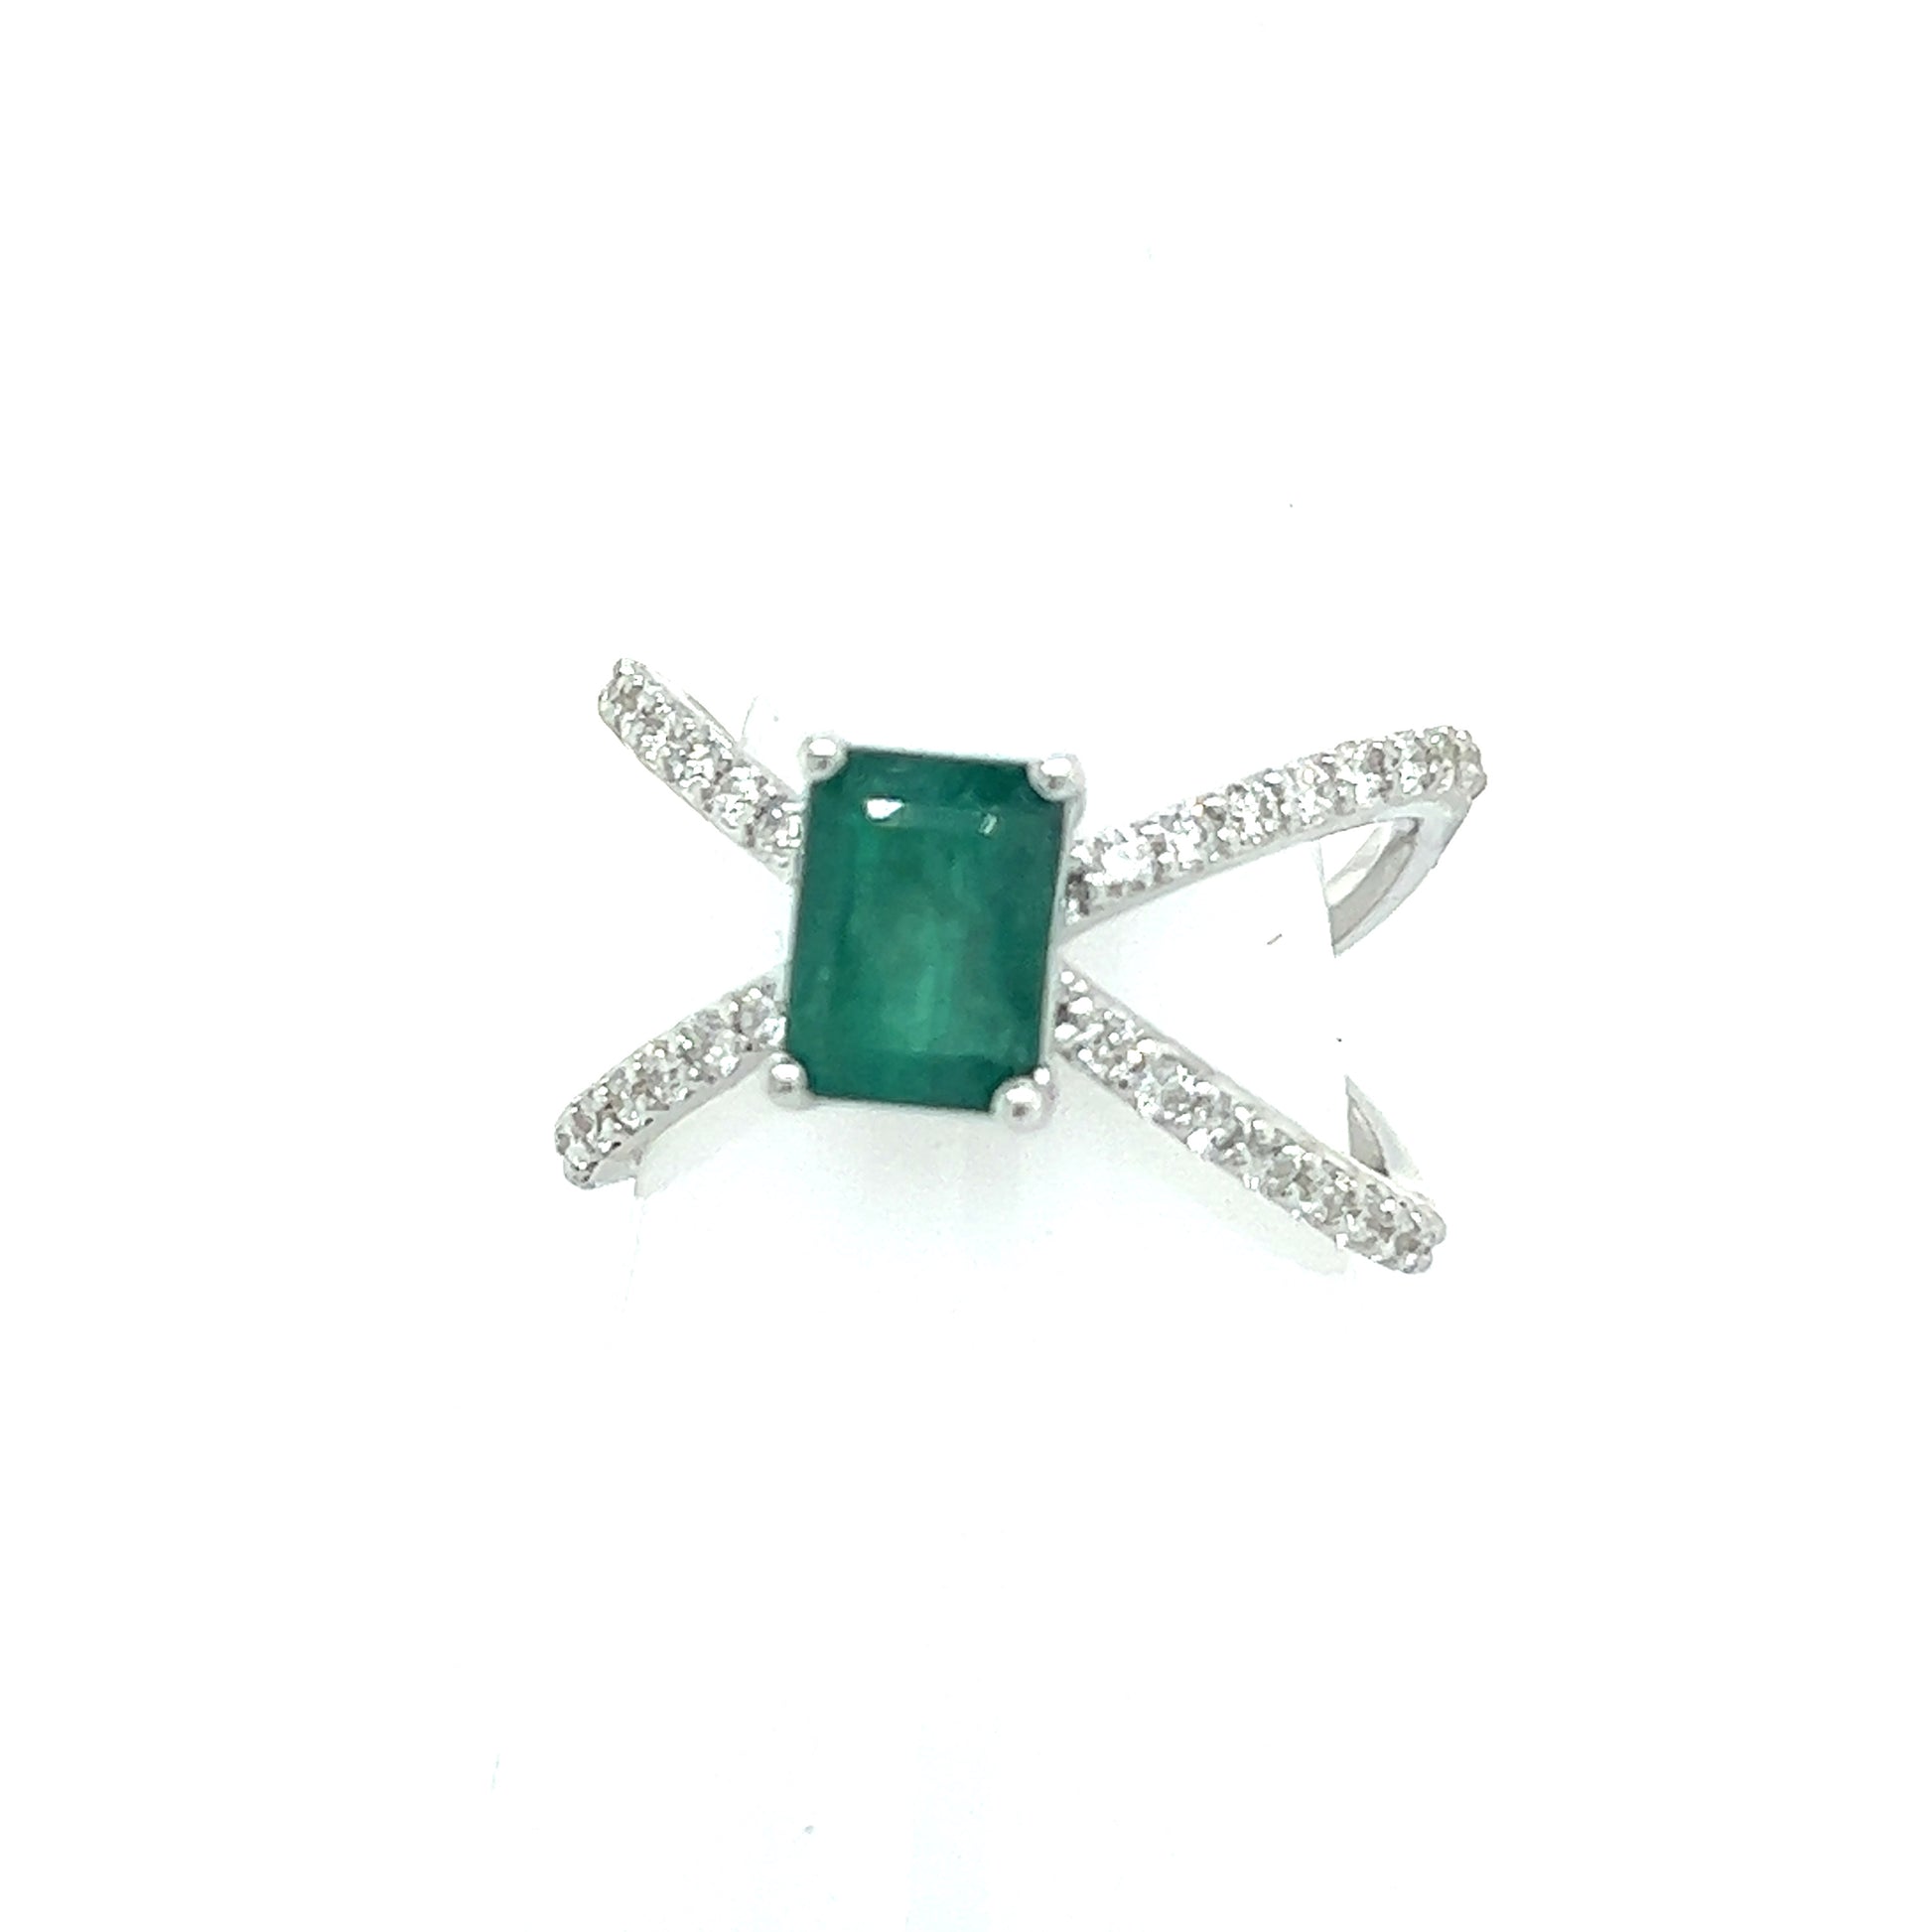 Natural Emerald Diamond Ring Size 6.5 14k W Gold 1.7 TCW Certified $4,975 217846